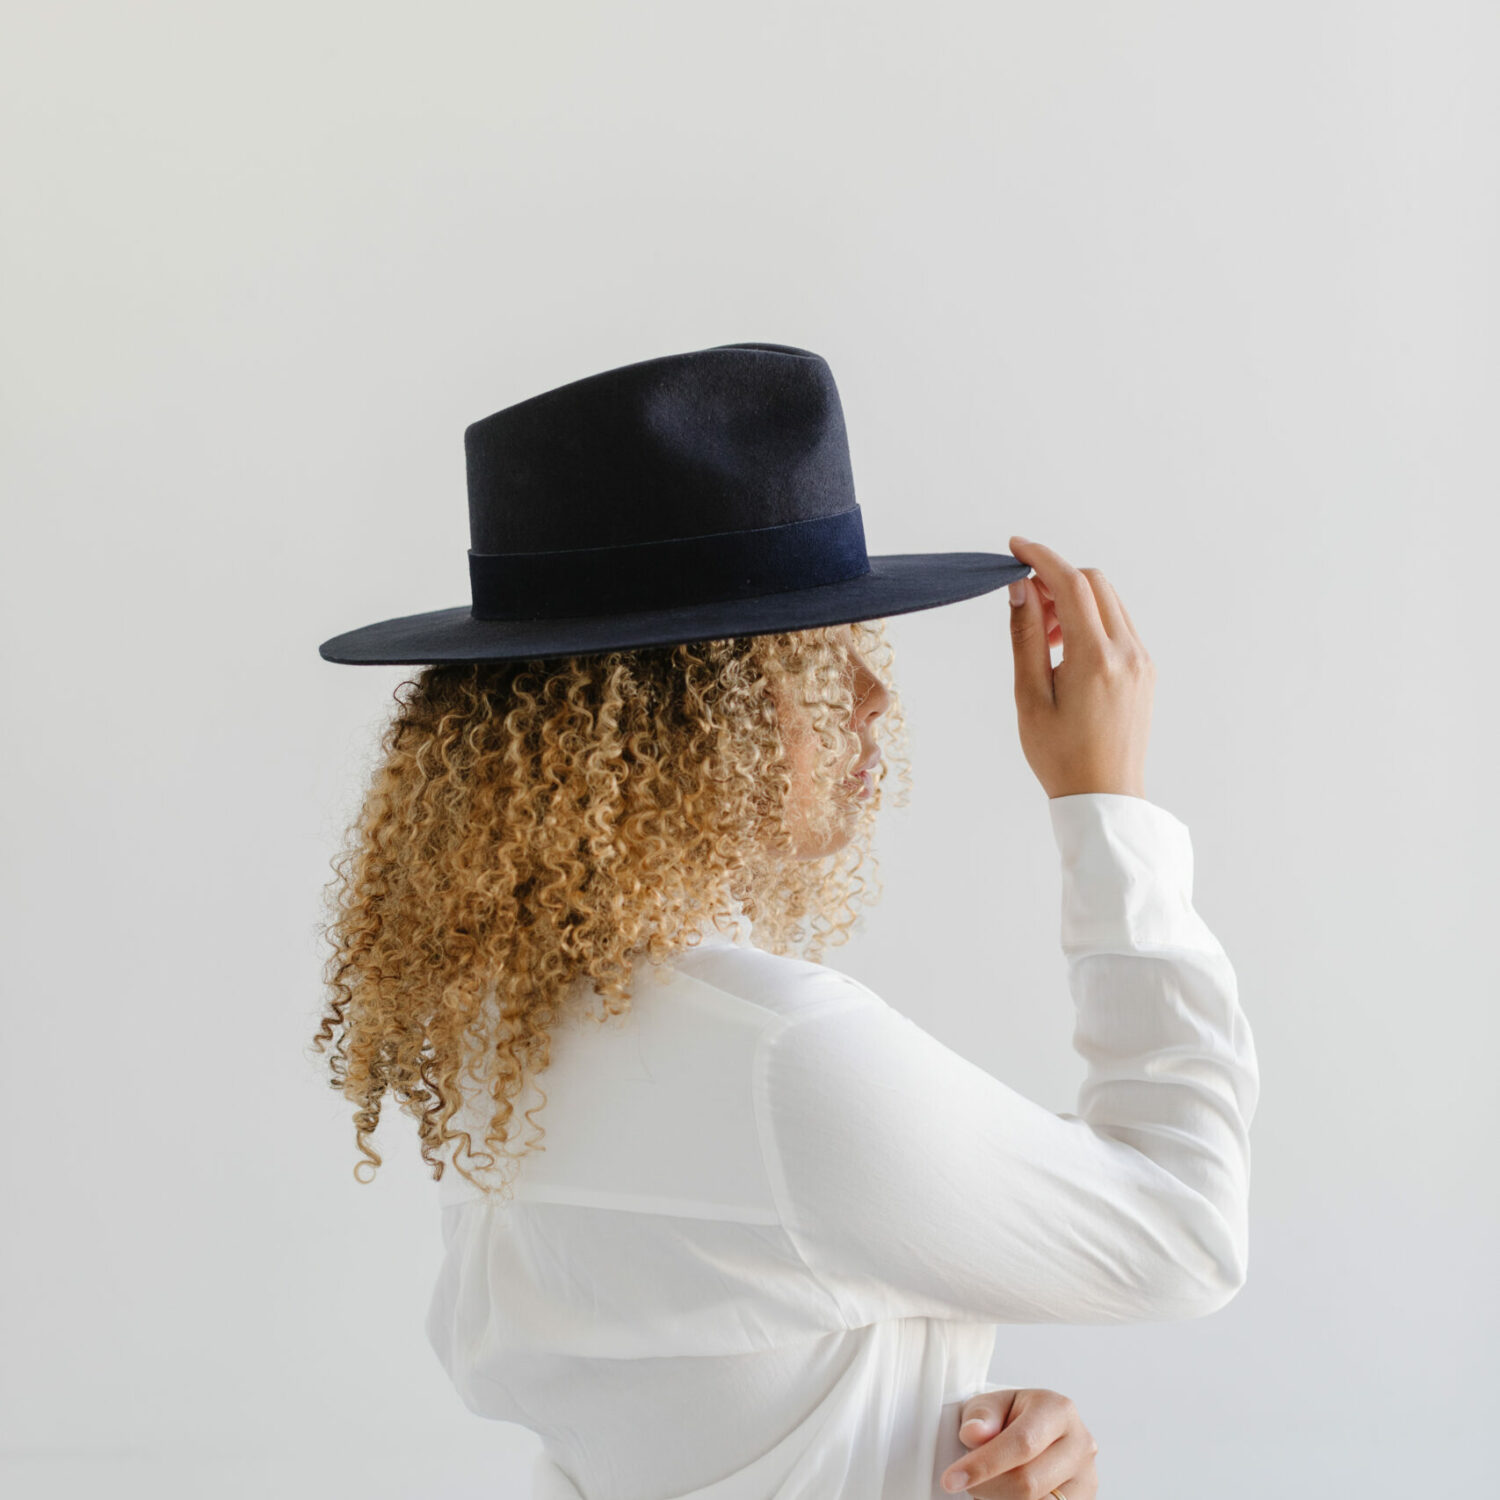 And created a hat brand specifically for women and the many “hats” they wear.